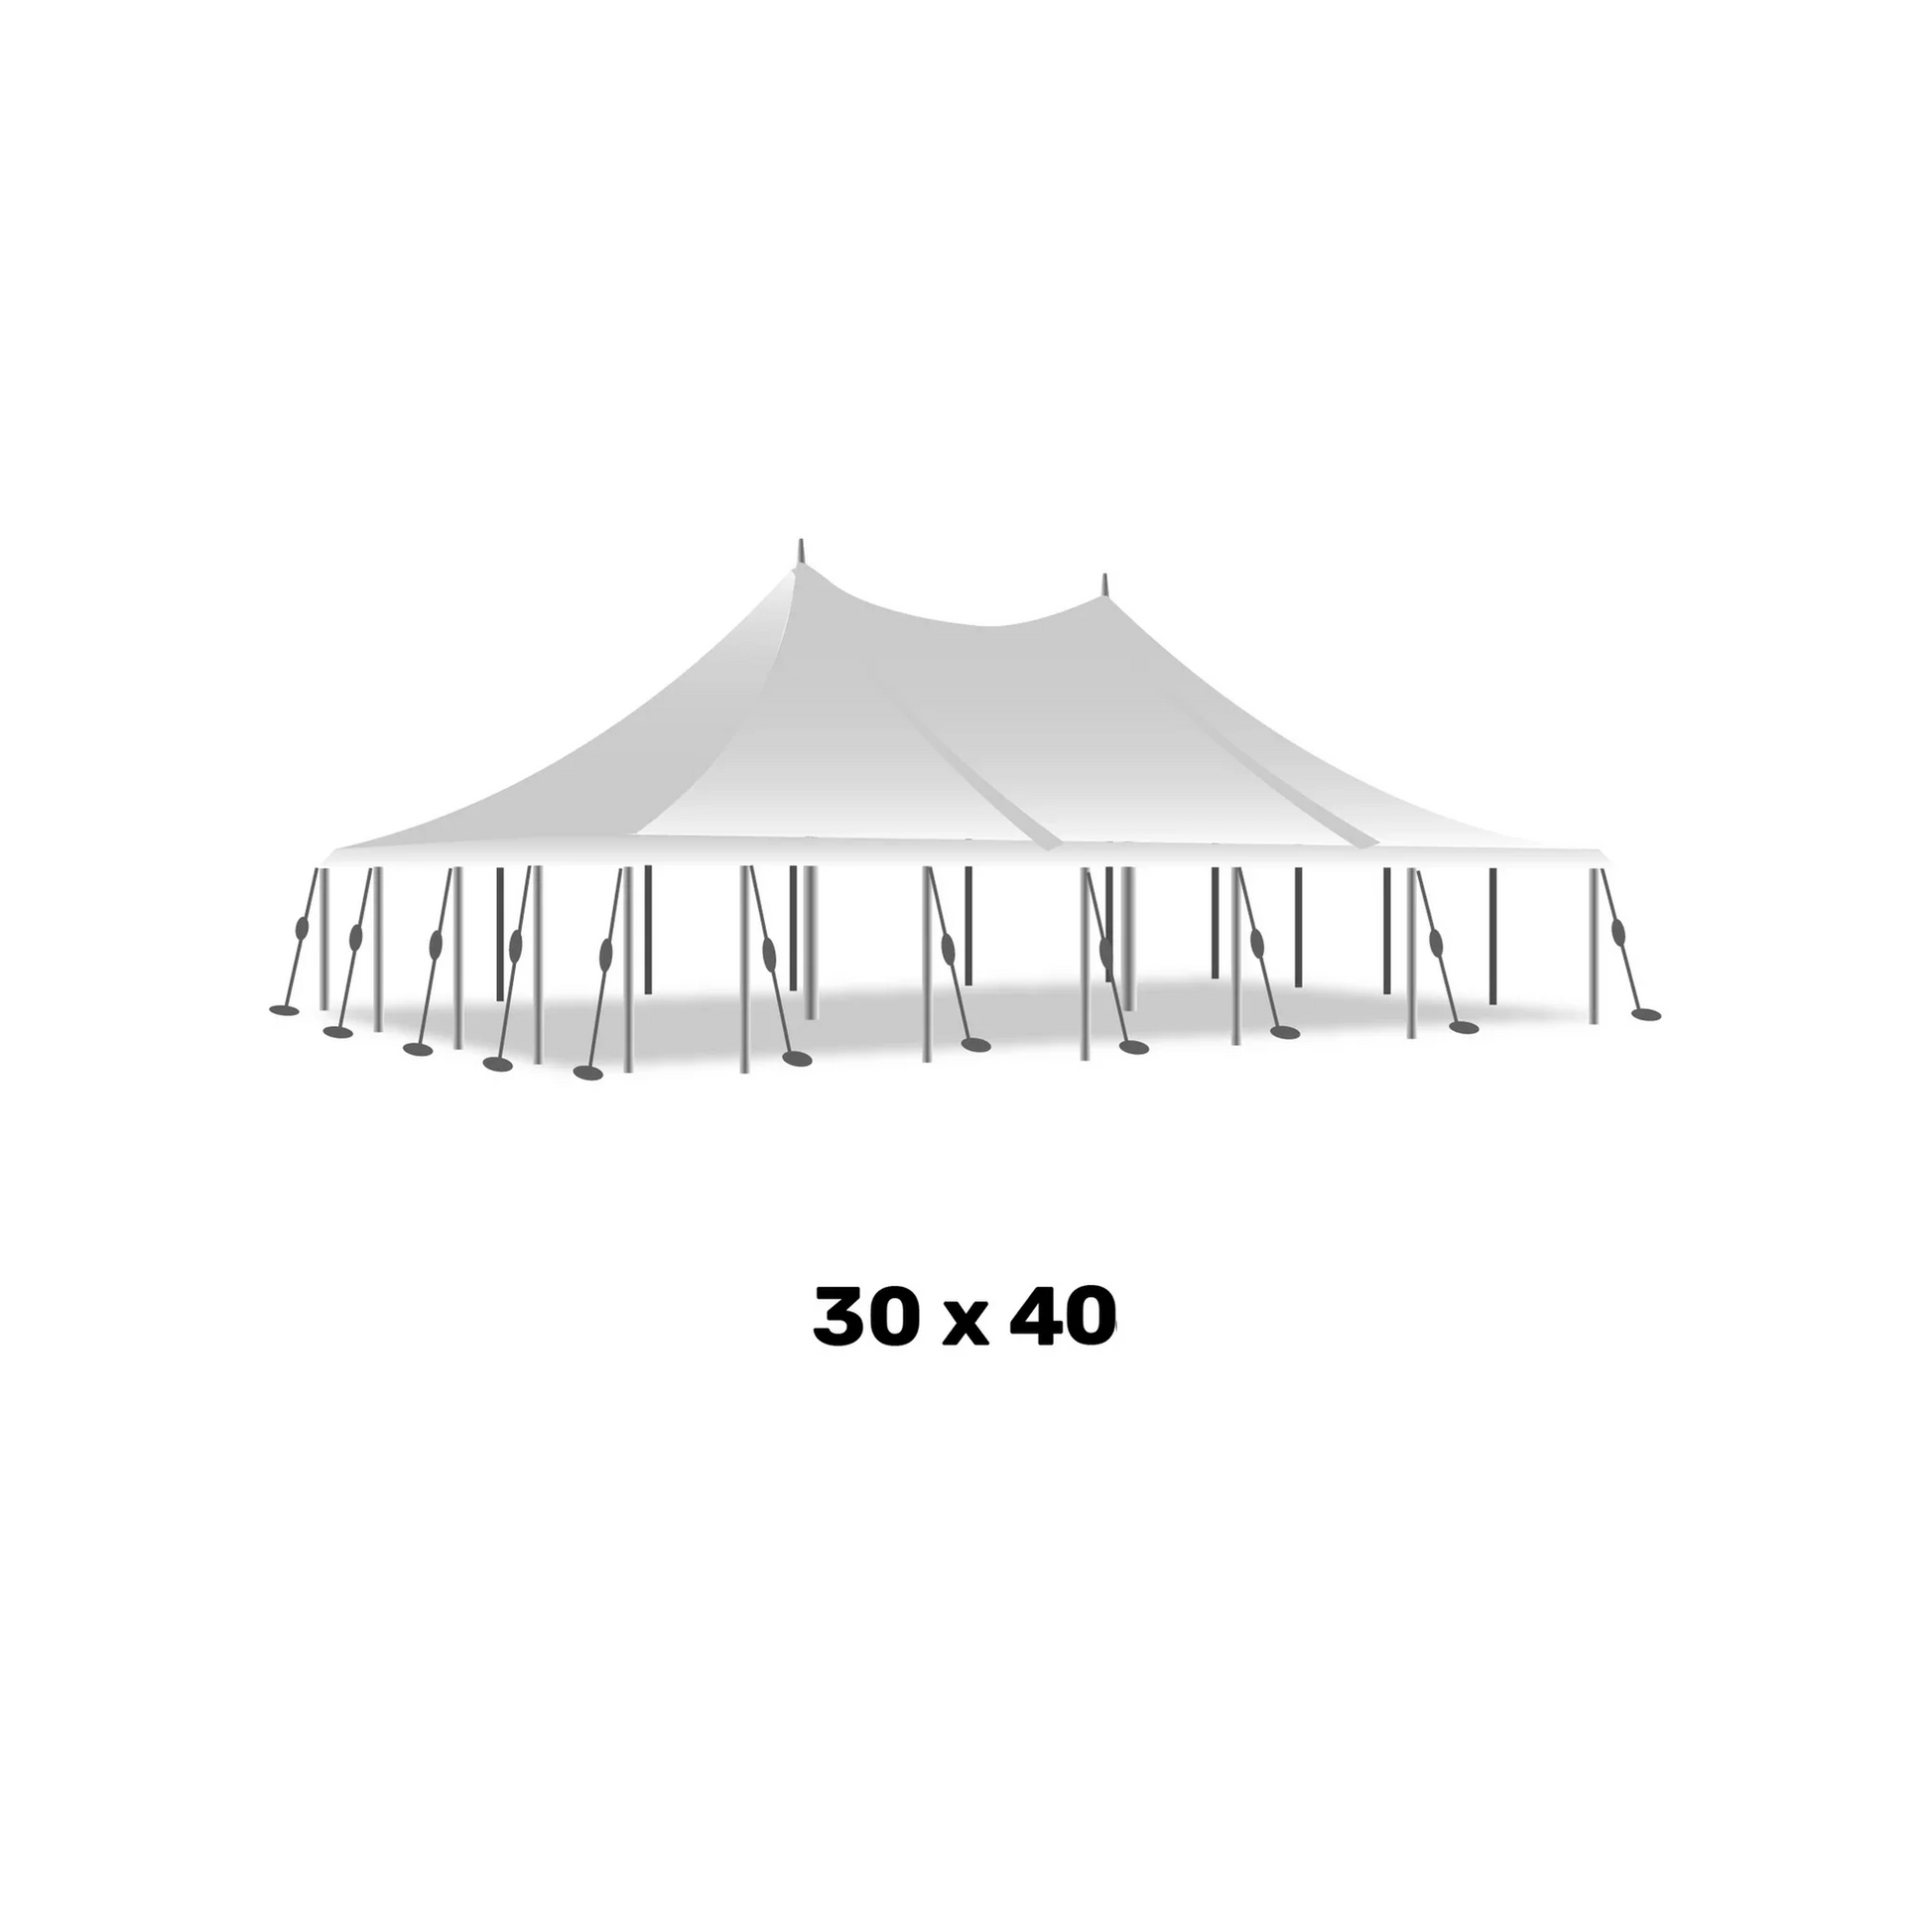 a 30 foot by 40 foot white marquee high peak pole tent